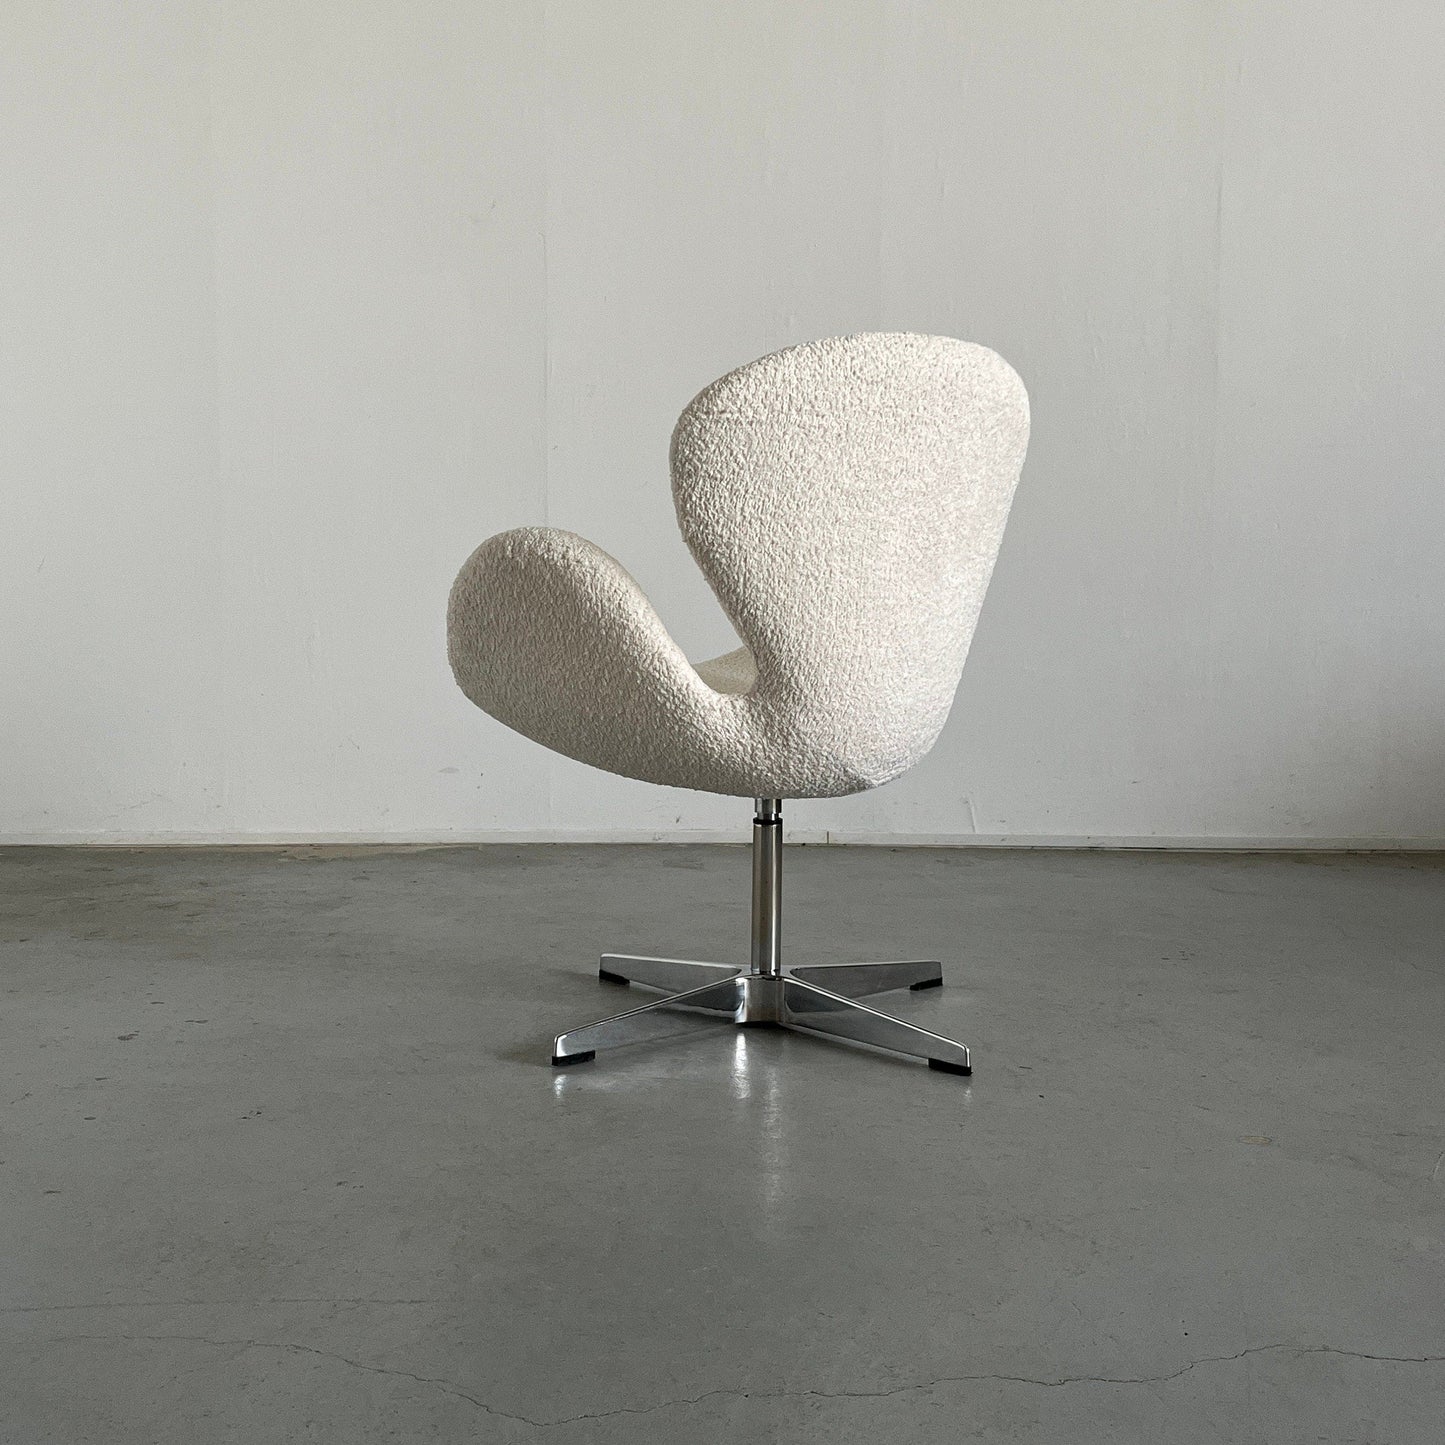 Swivel armchair in the style of Arne Jacobsen 'Swan' Chair, White Boucle / Iconic Scandinavian design, 80s reproduction, Vintage